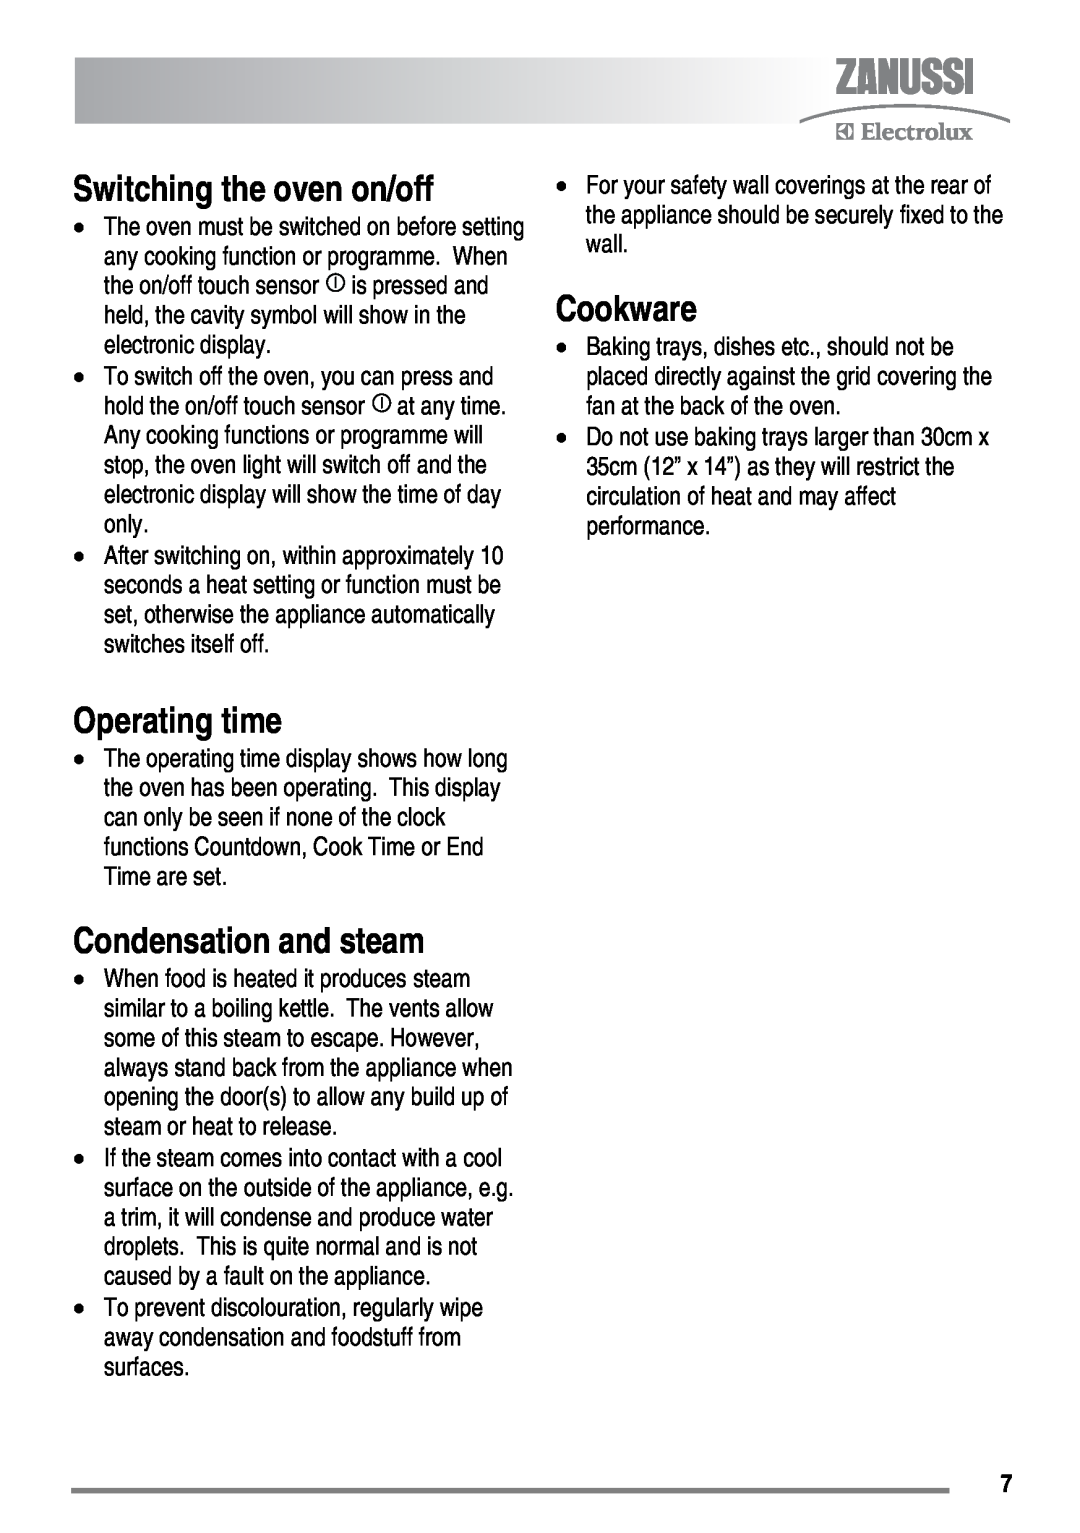 Zanussi ZKT6050 user manual Switching the oven on/off, Cookware, Operating time, Condensation and steam 